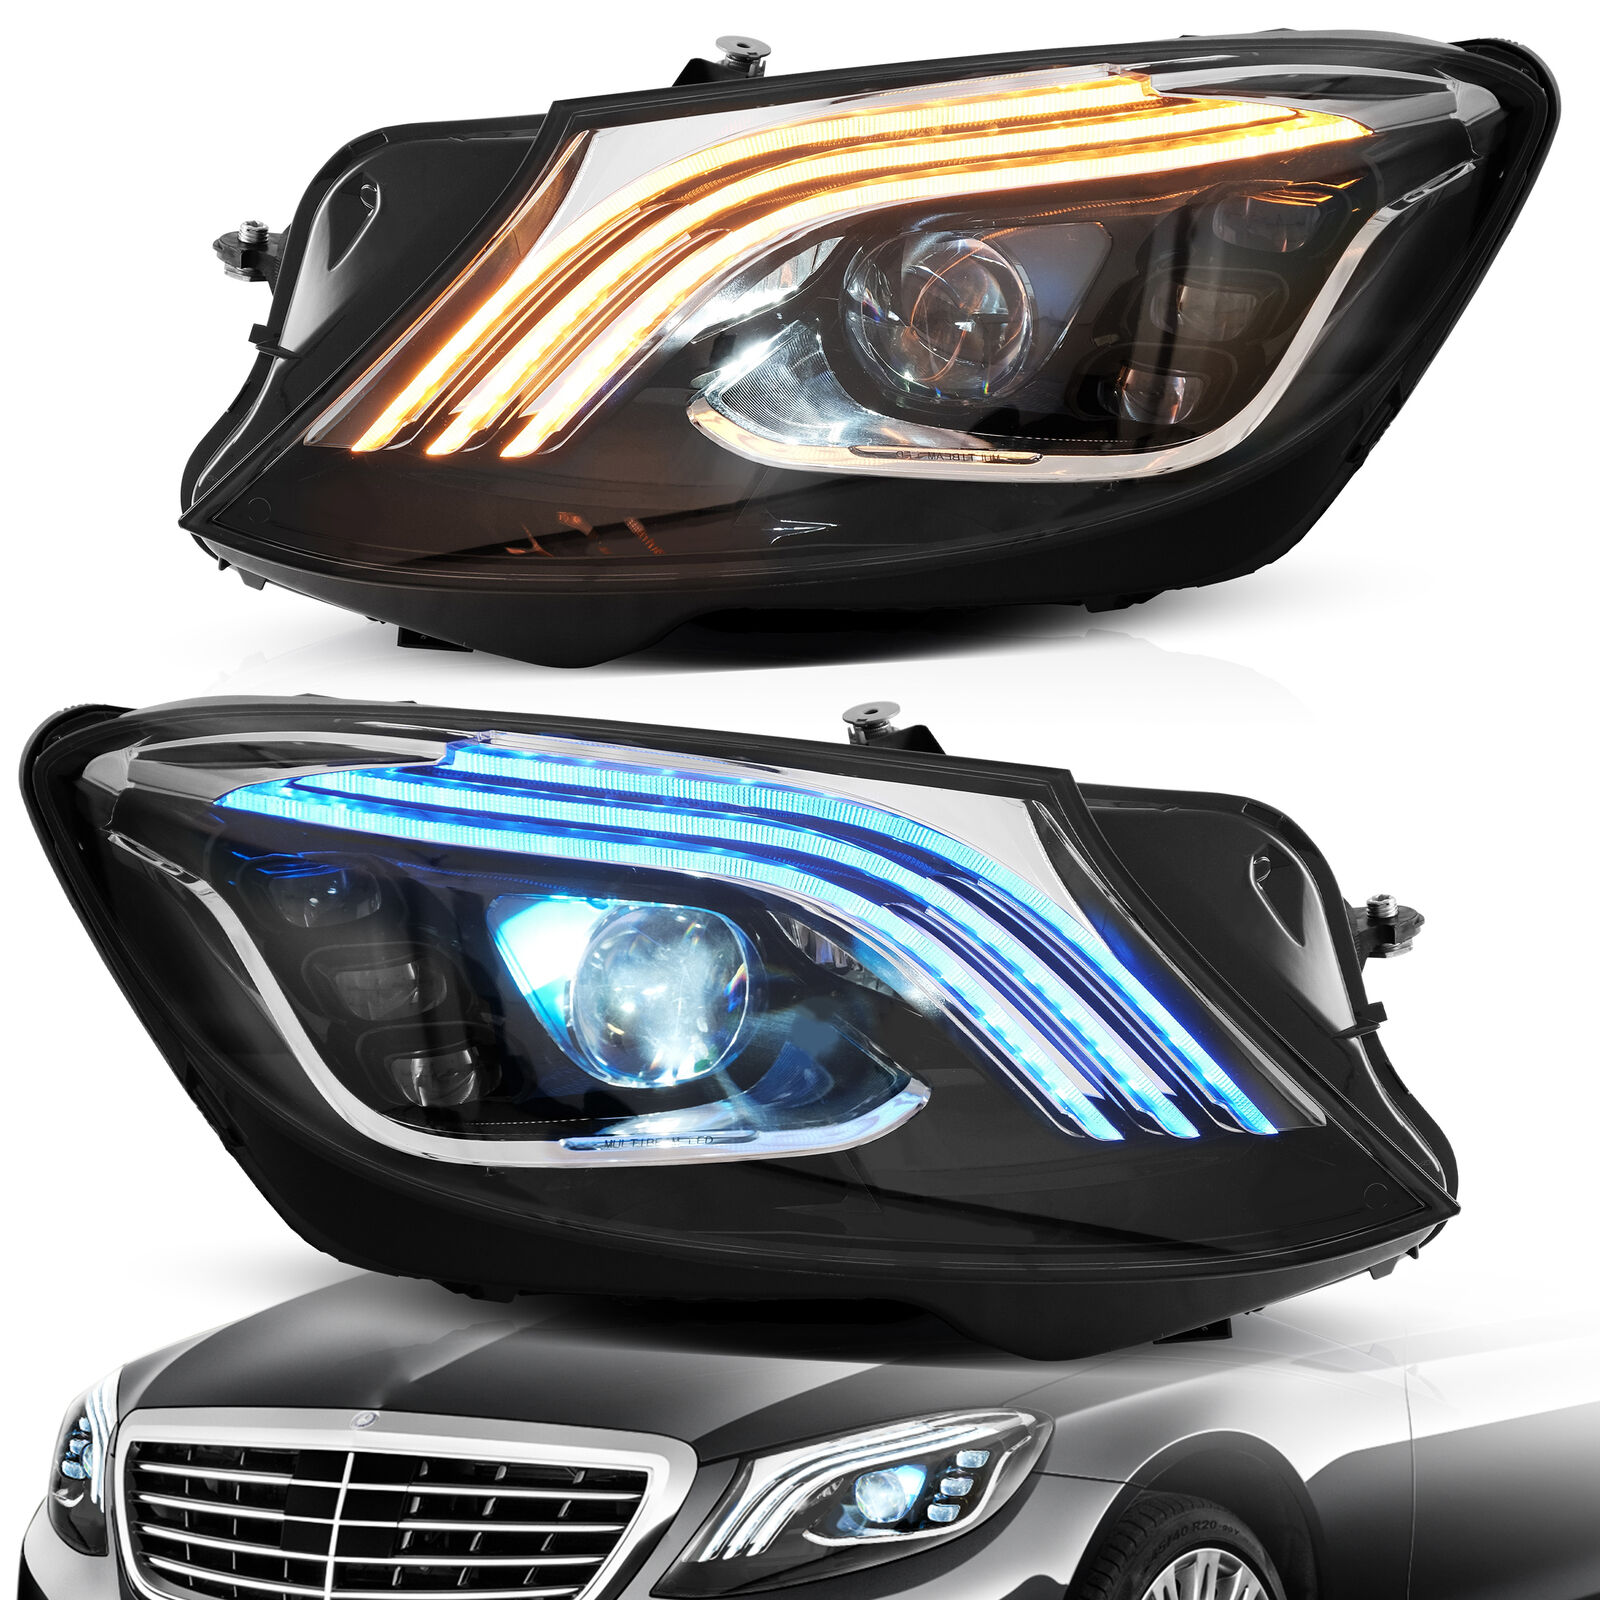 VLAND LED Headlights For Mercedez Benz S-Class 2014-2017 w/DRL Startup Animation